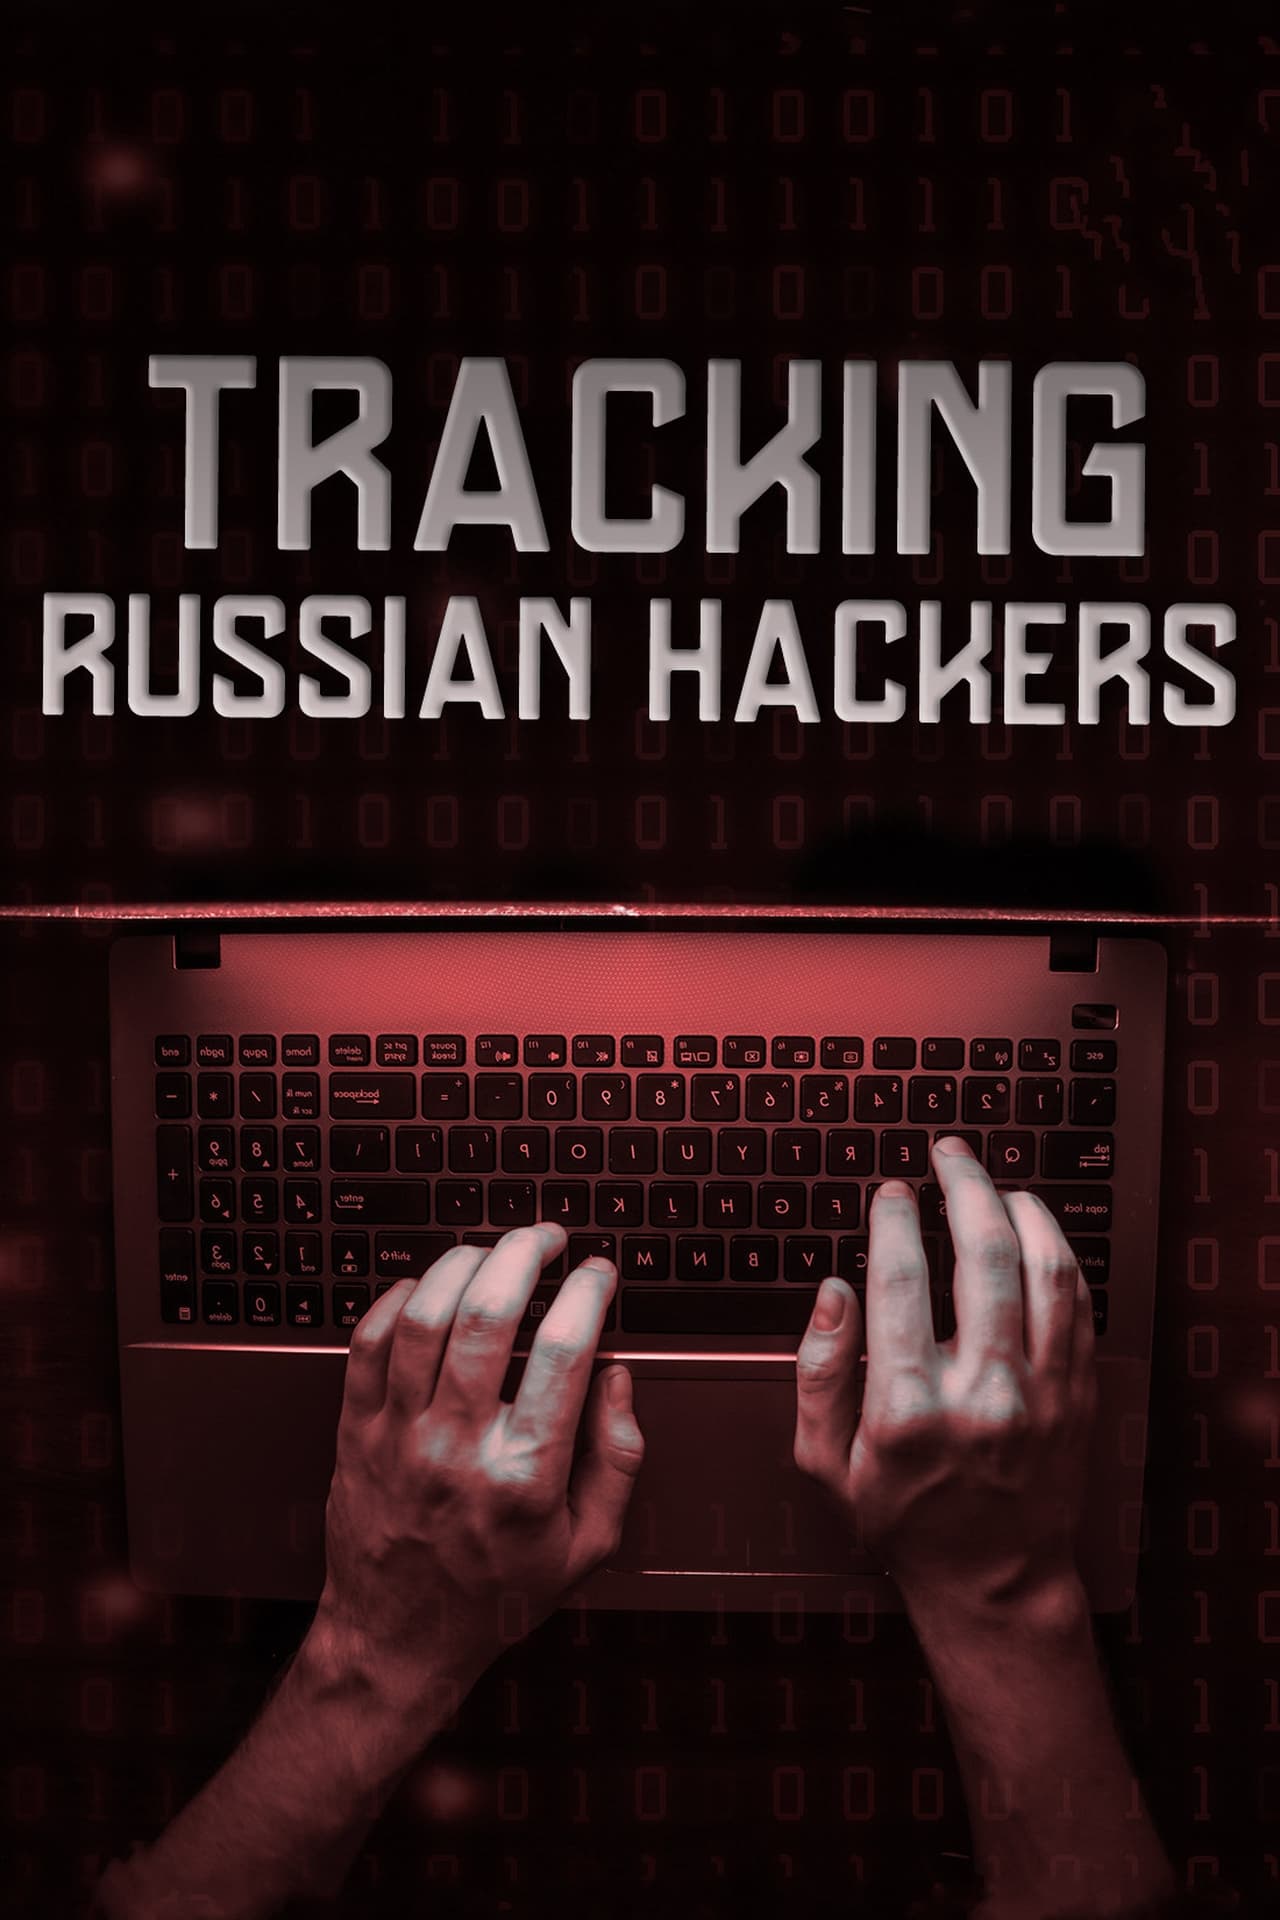 Tracking Russian Hackers